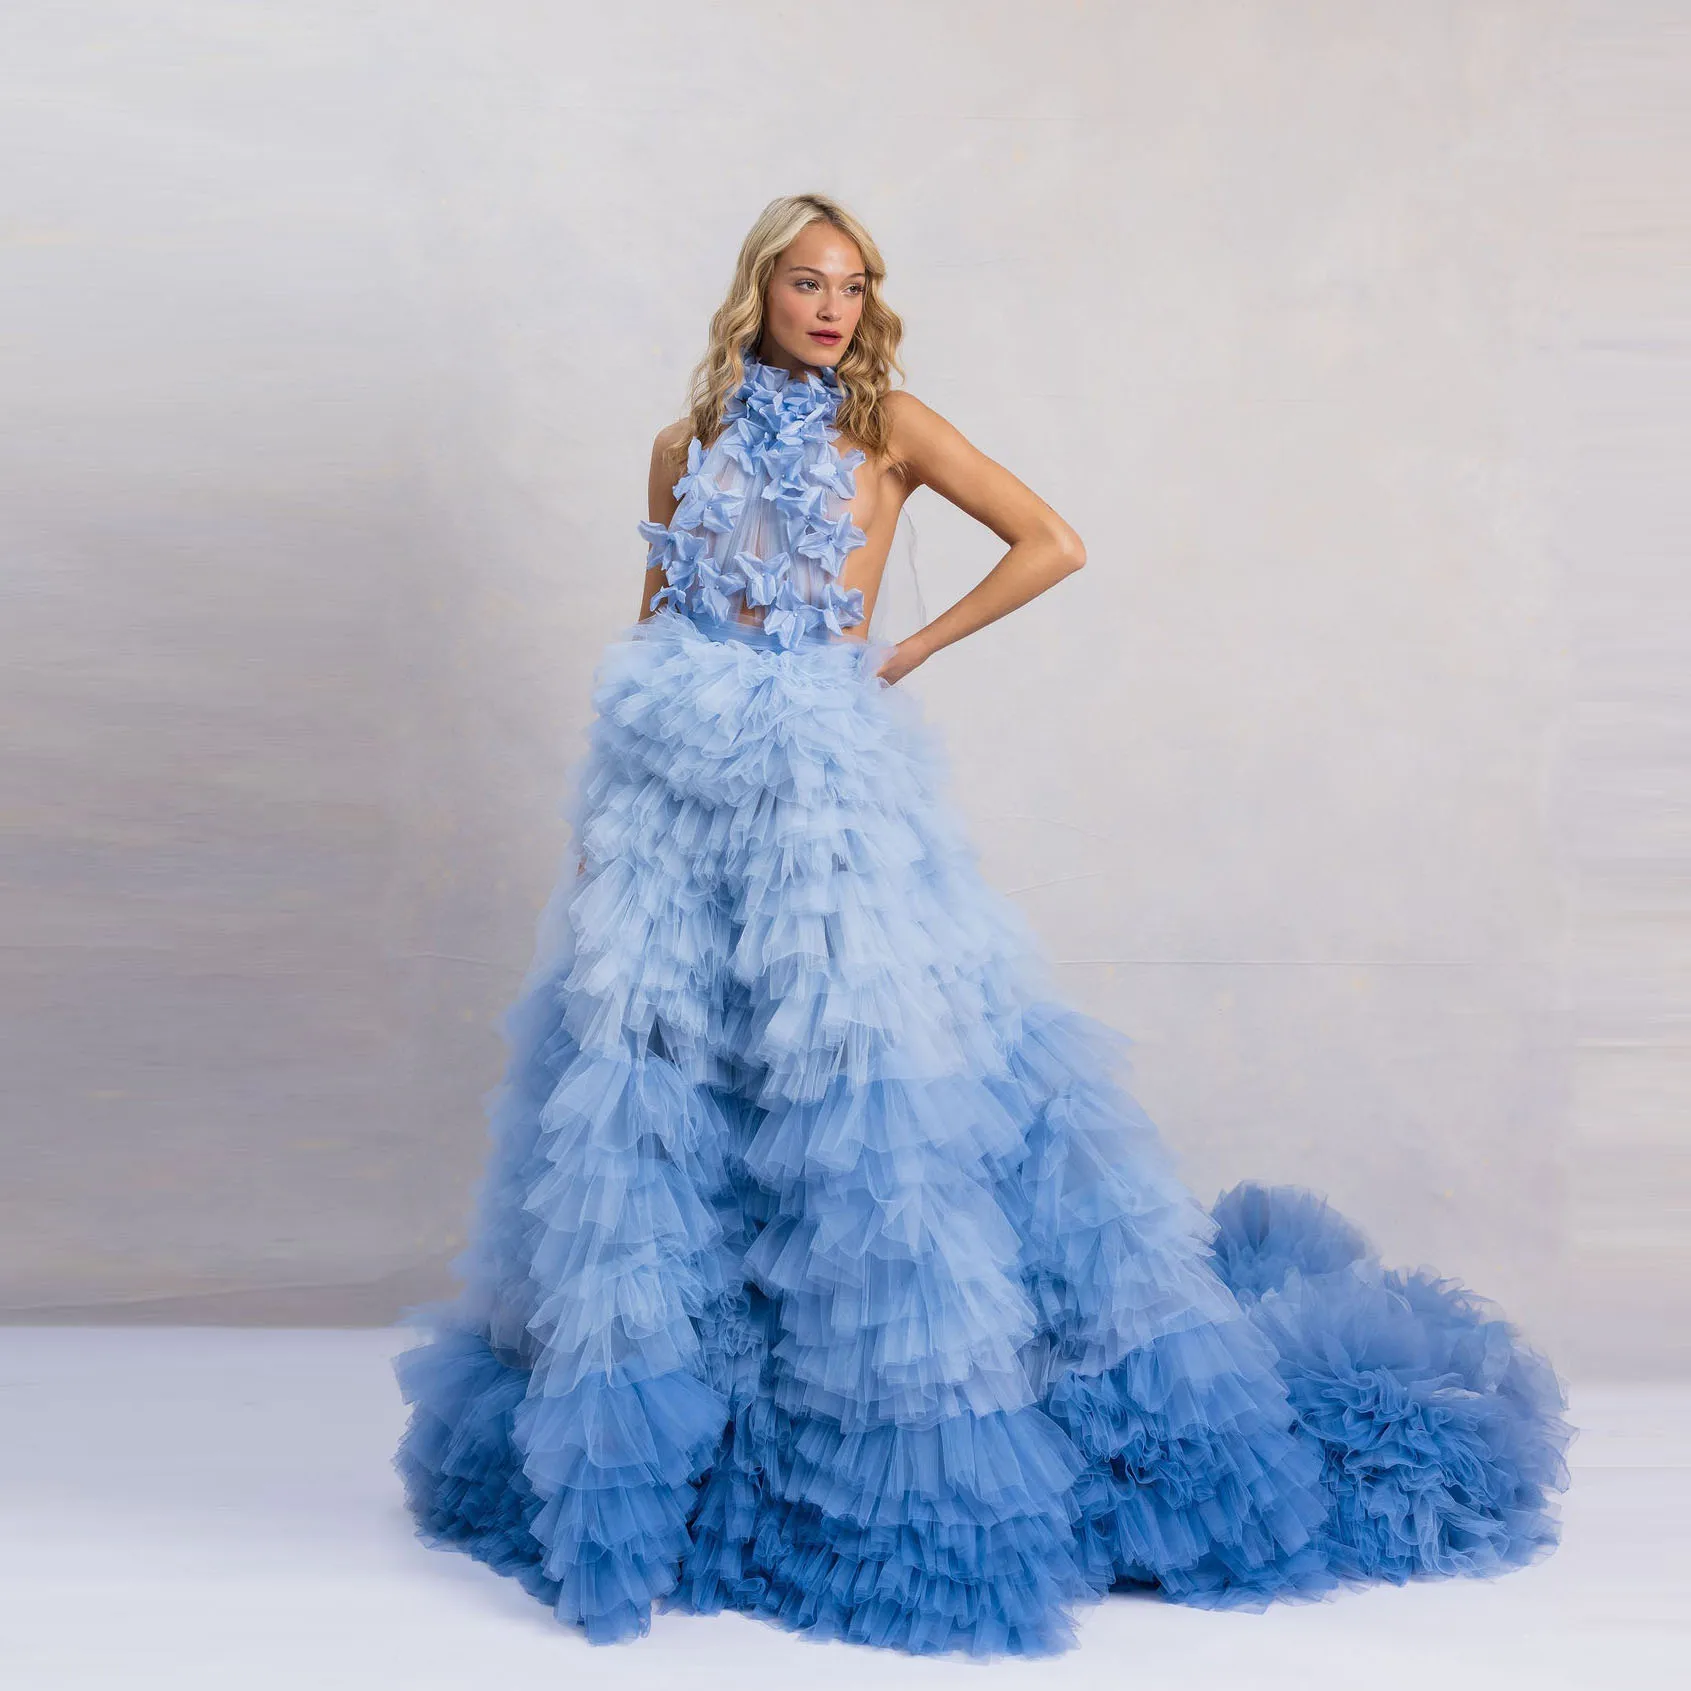 

Dreamlike Multi Color Blue Tiered Tulle Bridal Dresses Halter Backless Floral Formal Party Dresses Pretty Tutu Weddng Gowns